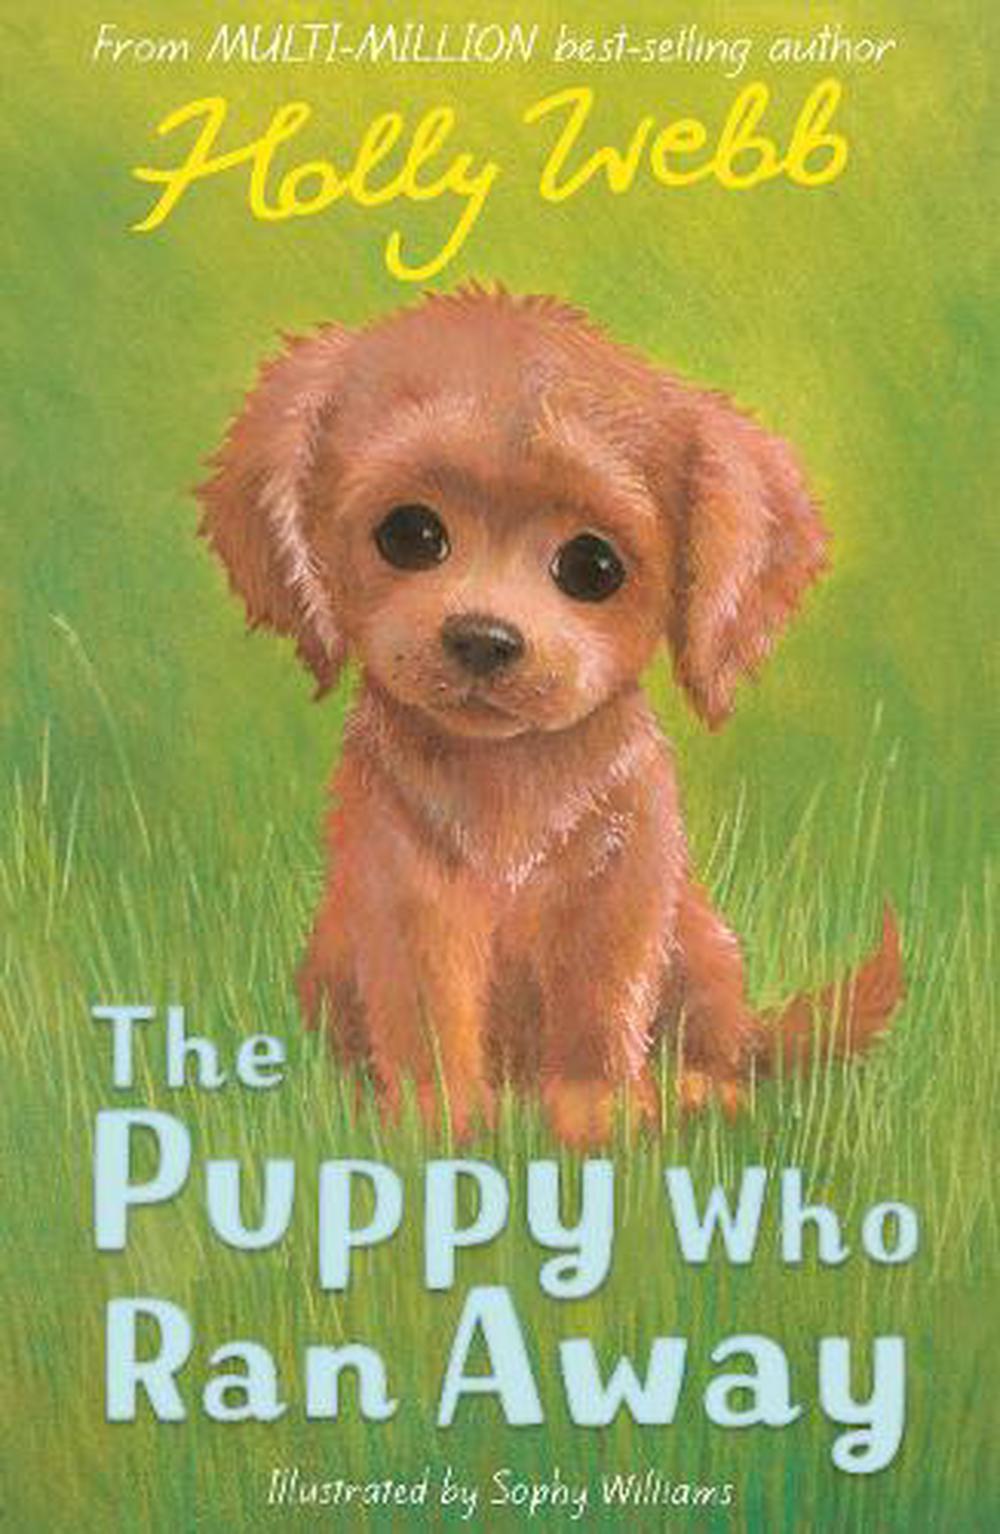 Puppy Who Ran Away by Holly Webb, Paperback, 9781788953030 | Buy online ...